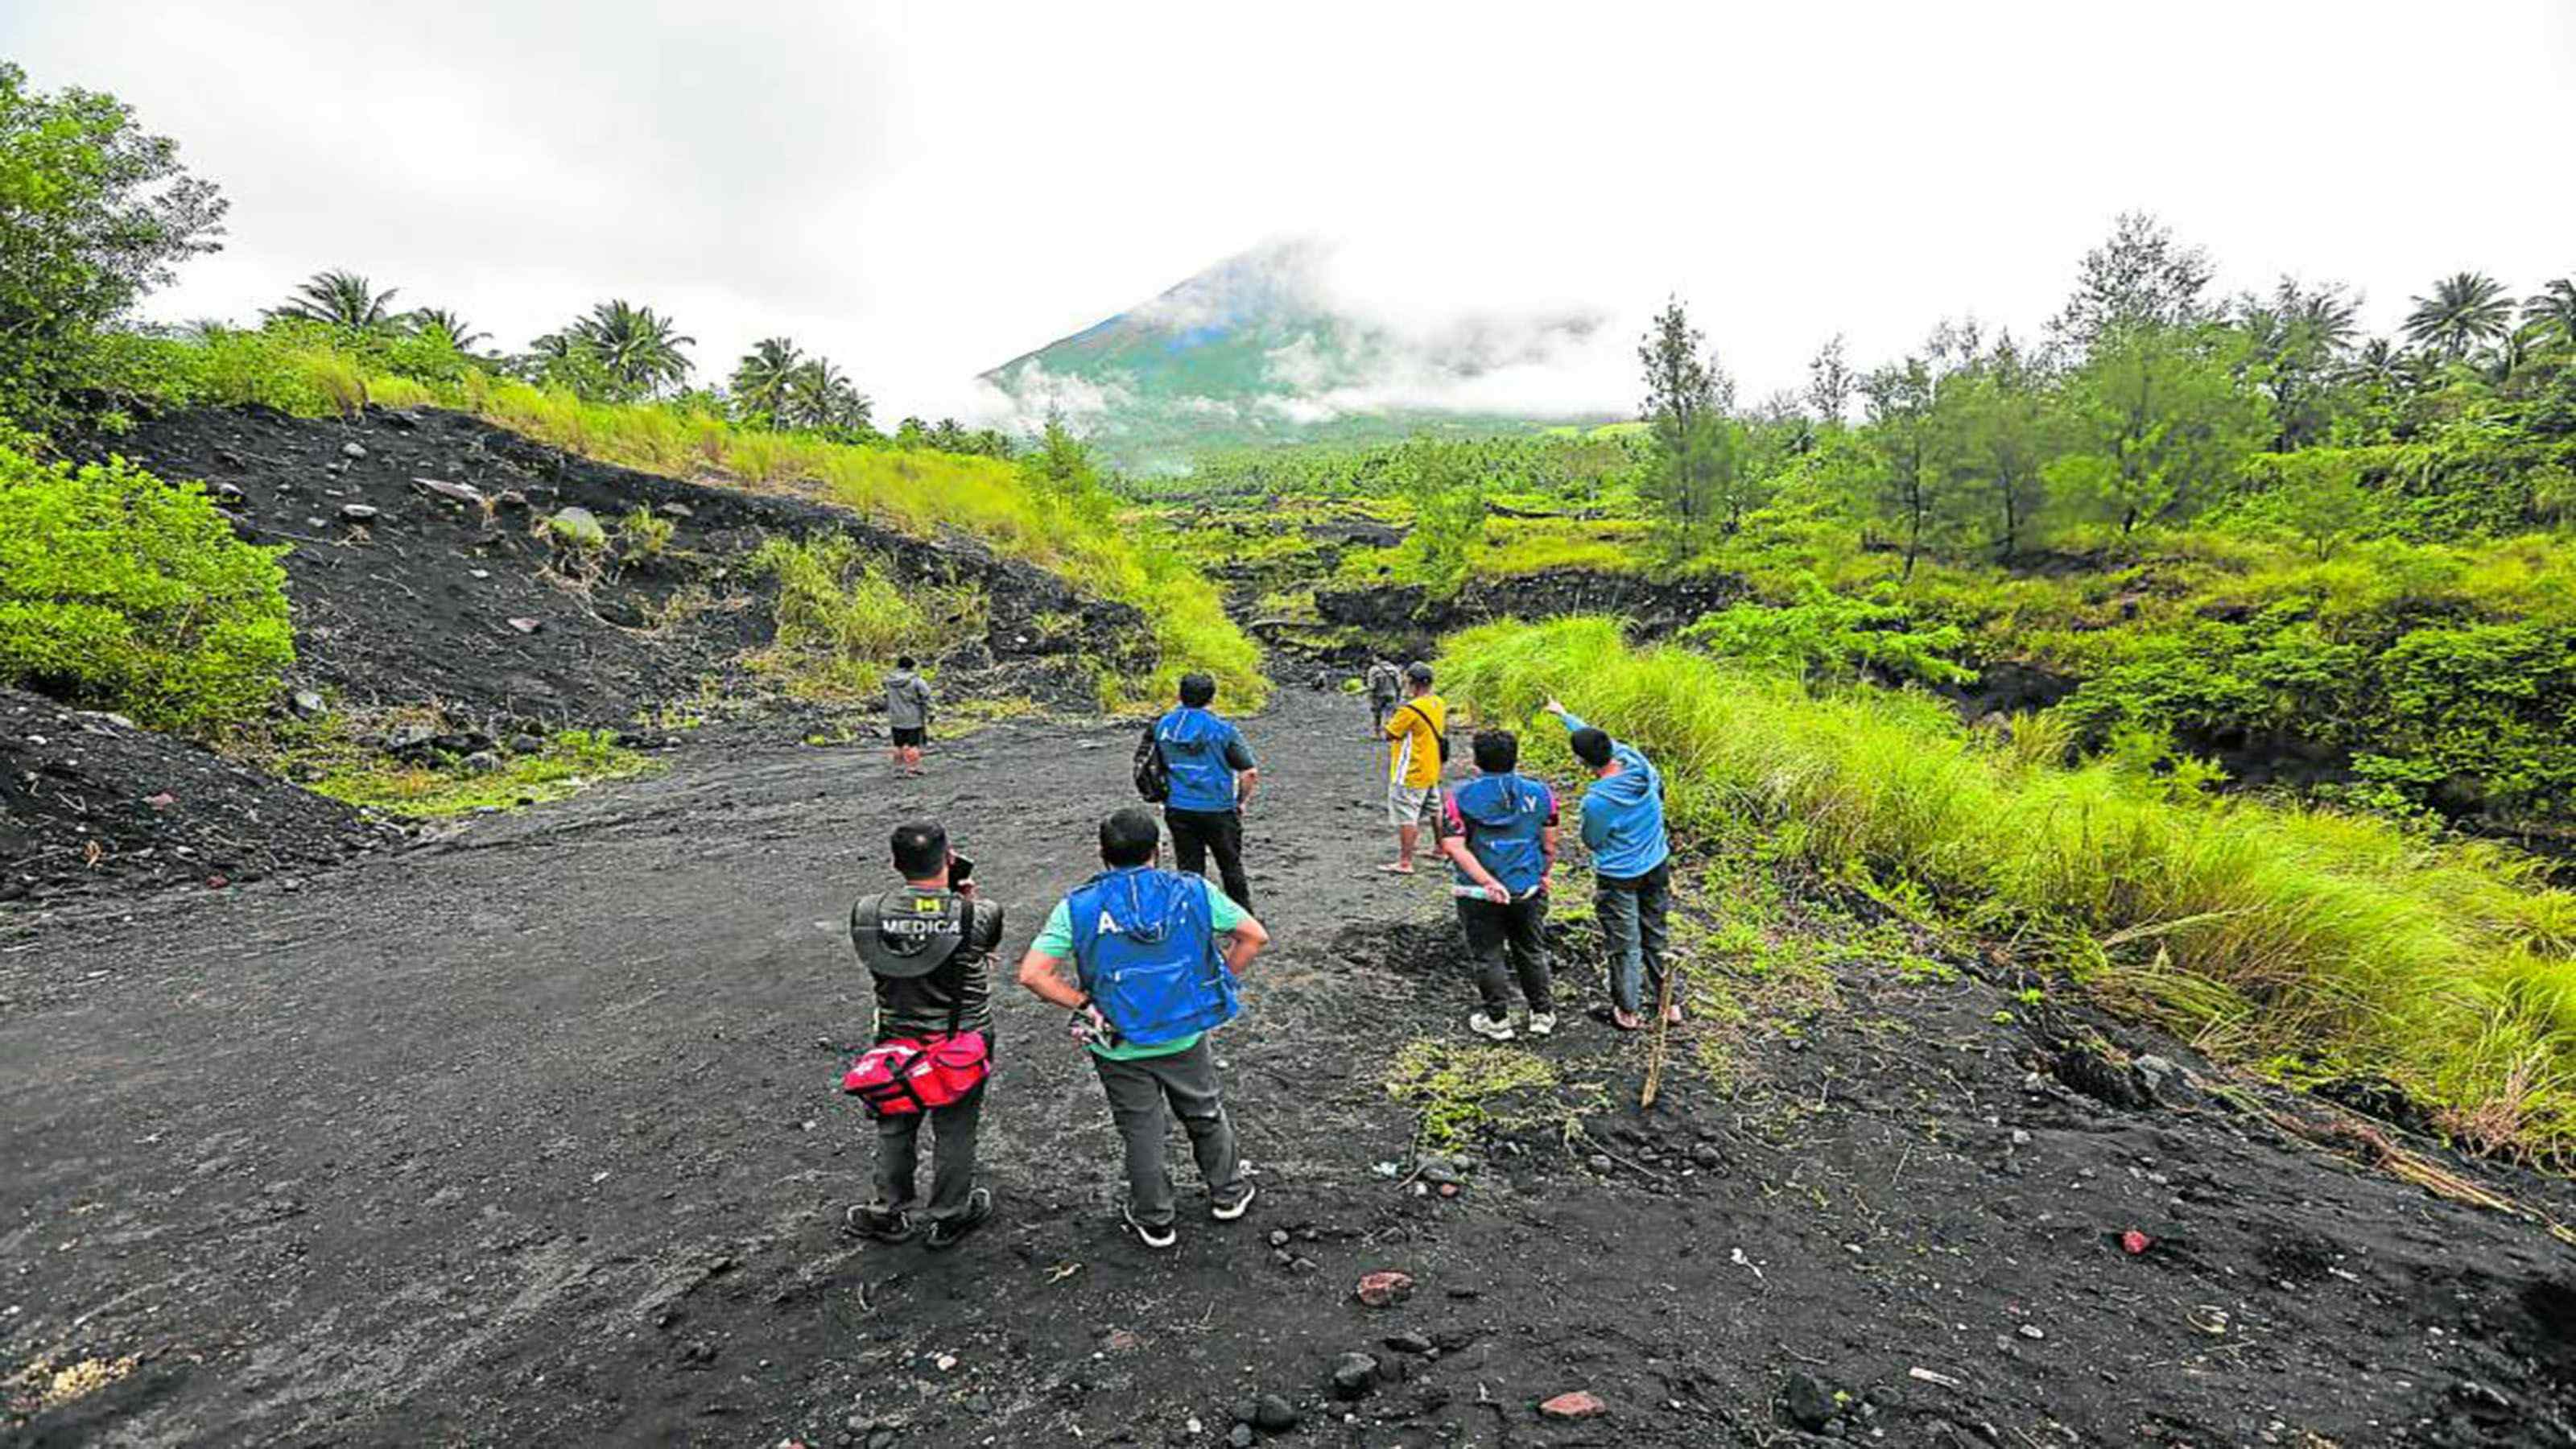 Bad weather prevents search and rescue in Mayon volcano